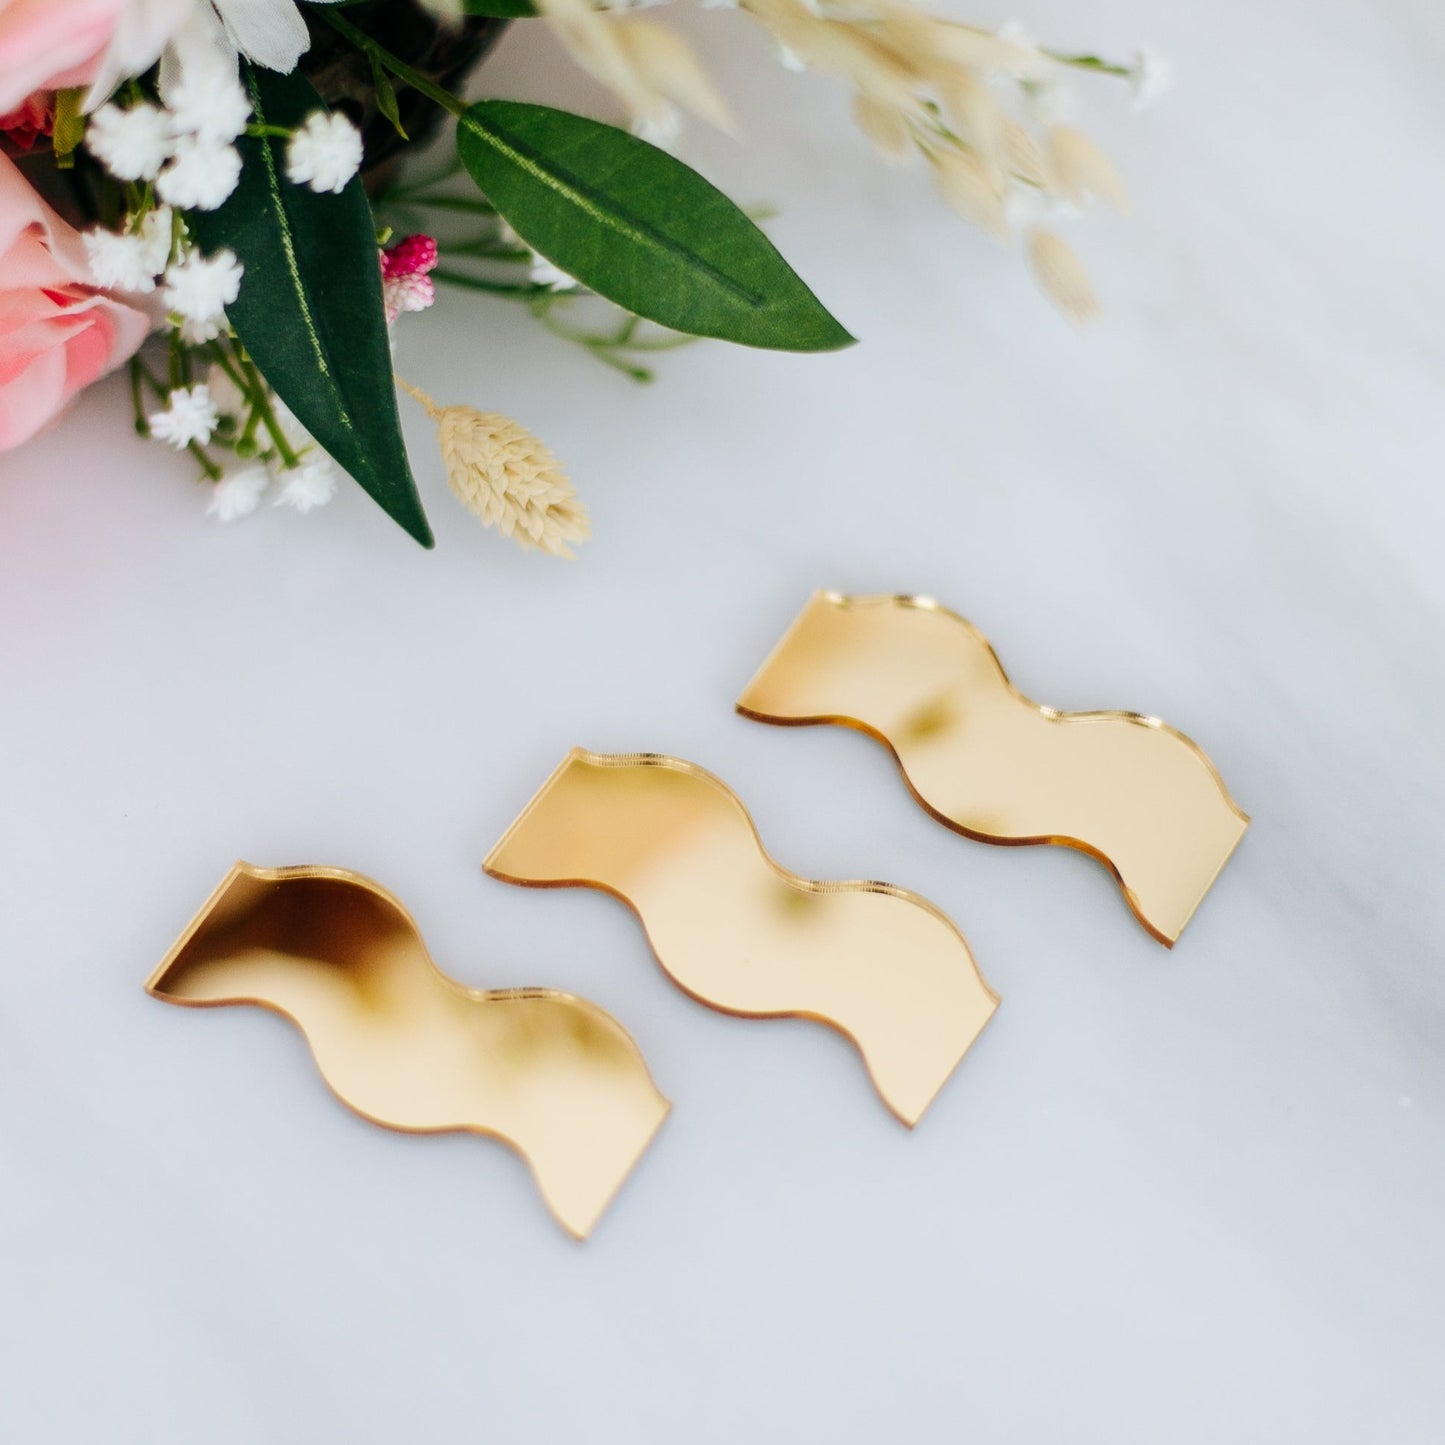 Wavy Squiggle Place Cards Plate Names Acrylic Gold Party Favor Name Place Card Table Number Tags for Place Cards Modern Wedding